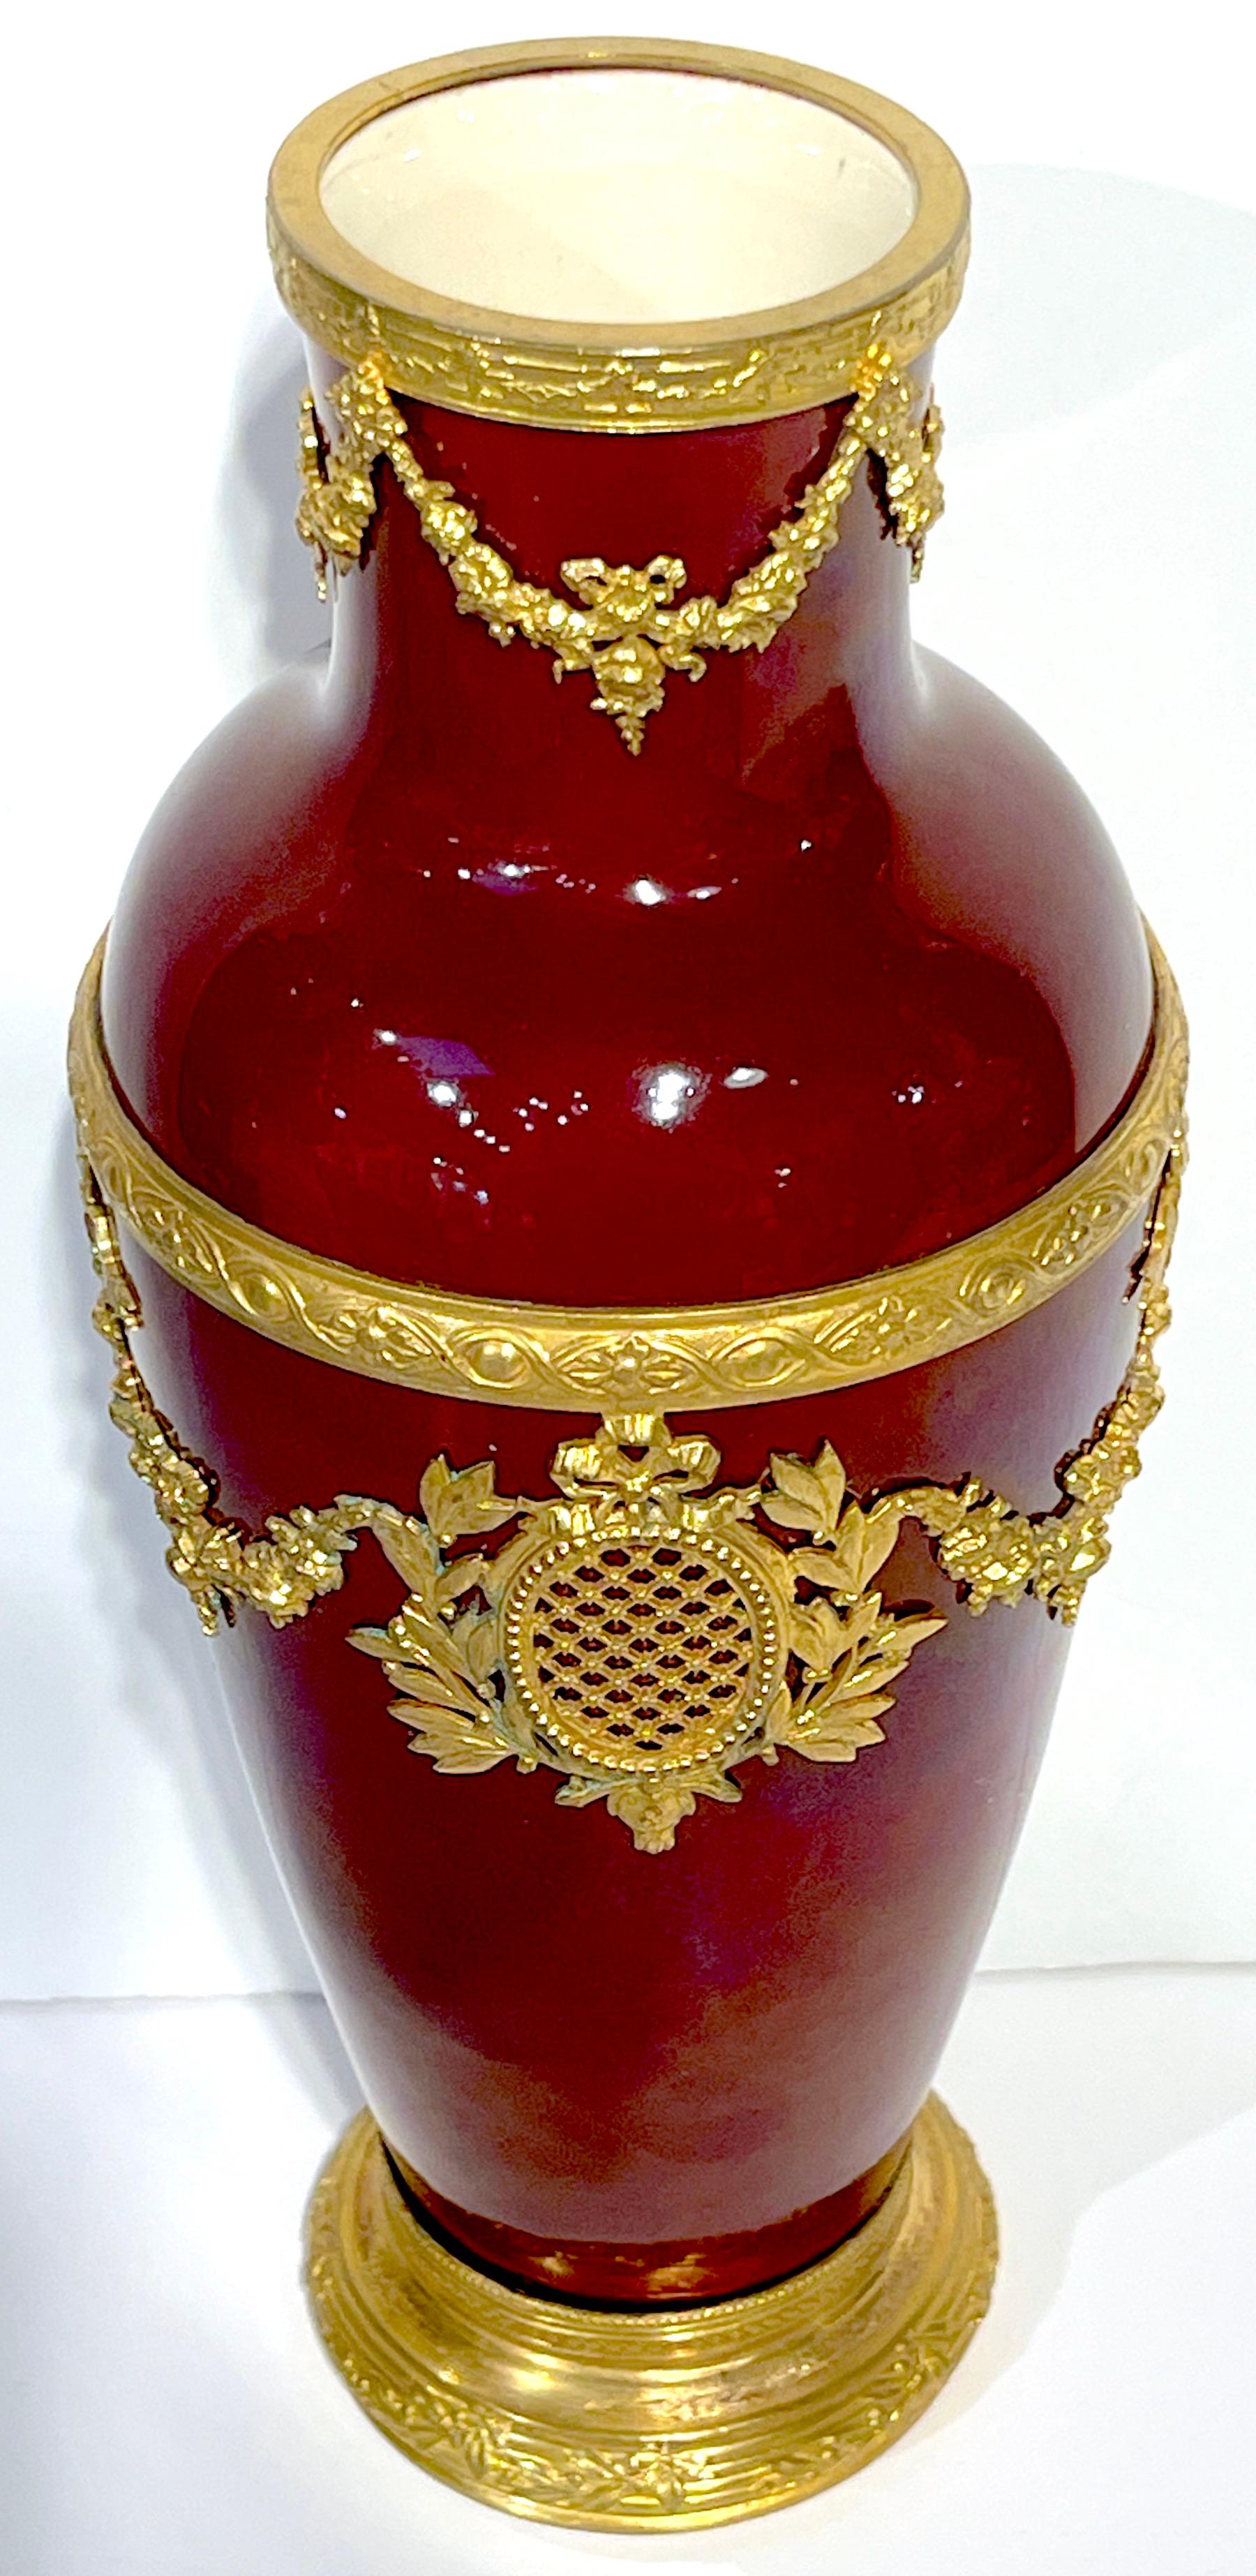 Paul Milet for Sevres Red Flambe Ormolu Mounted Neoclassical Vase 
Designed by Paul Milet (1870-1950)
Executed by Sevres Porcelain 

A beautiful Paul Milet for Sevres red flambe ormolu mounted neoclassical vase, a testament to timeless elegance.